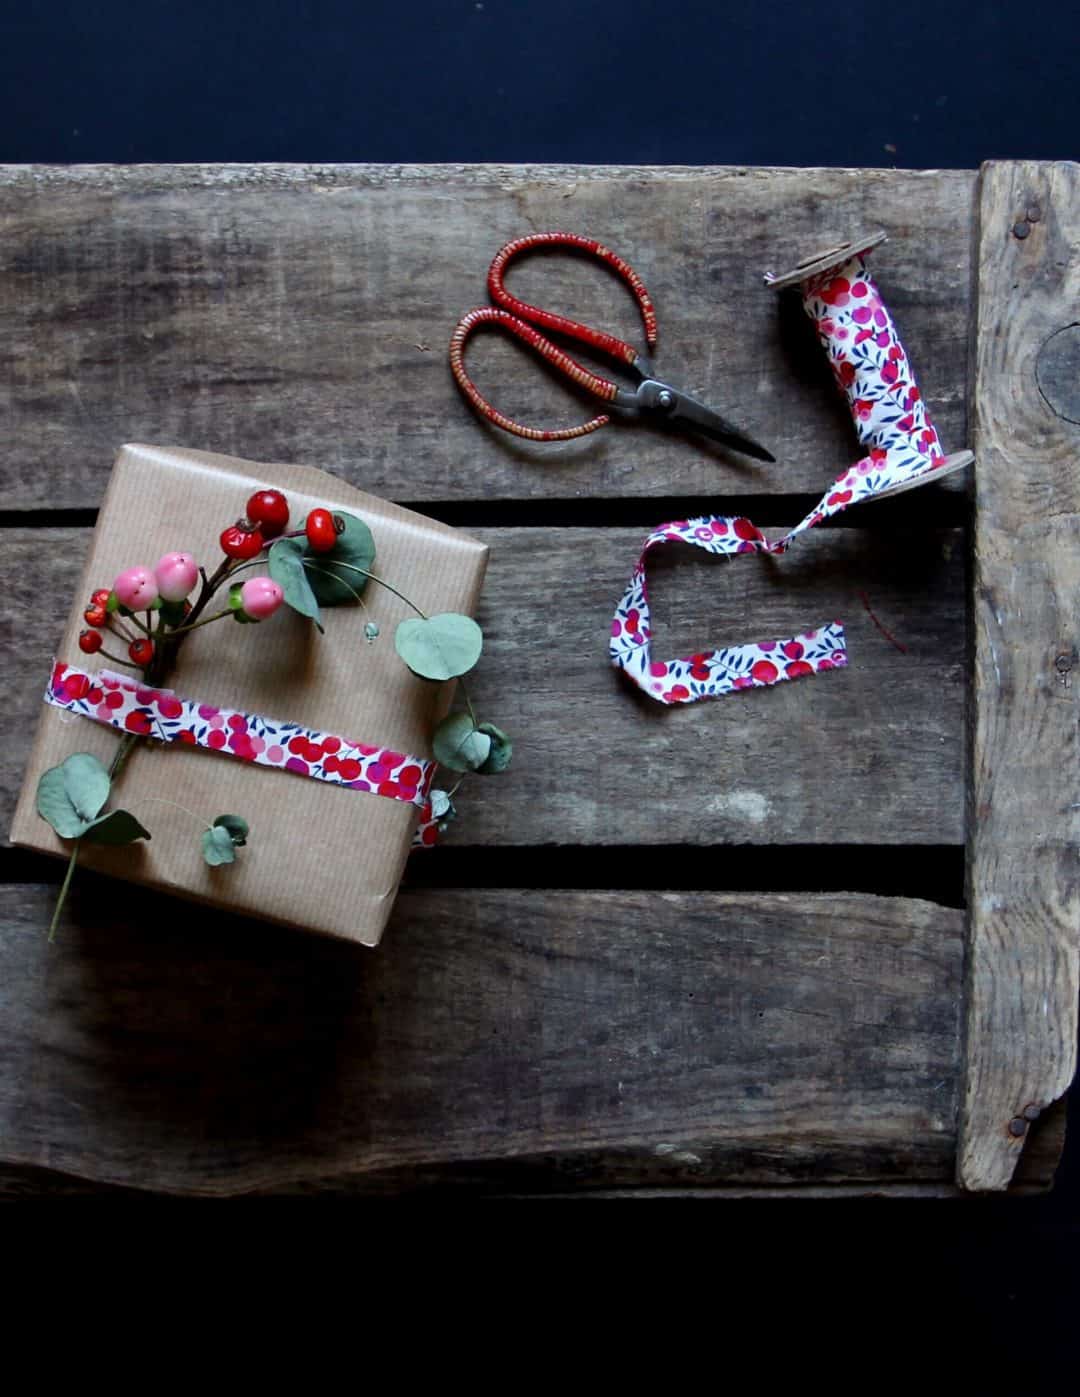 Eco friendly decorations - recycled craft wrapping paper, berry